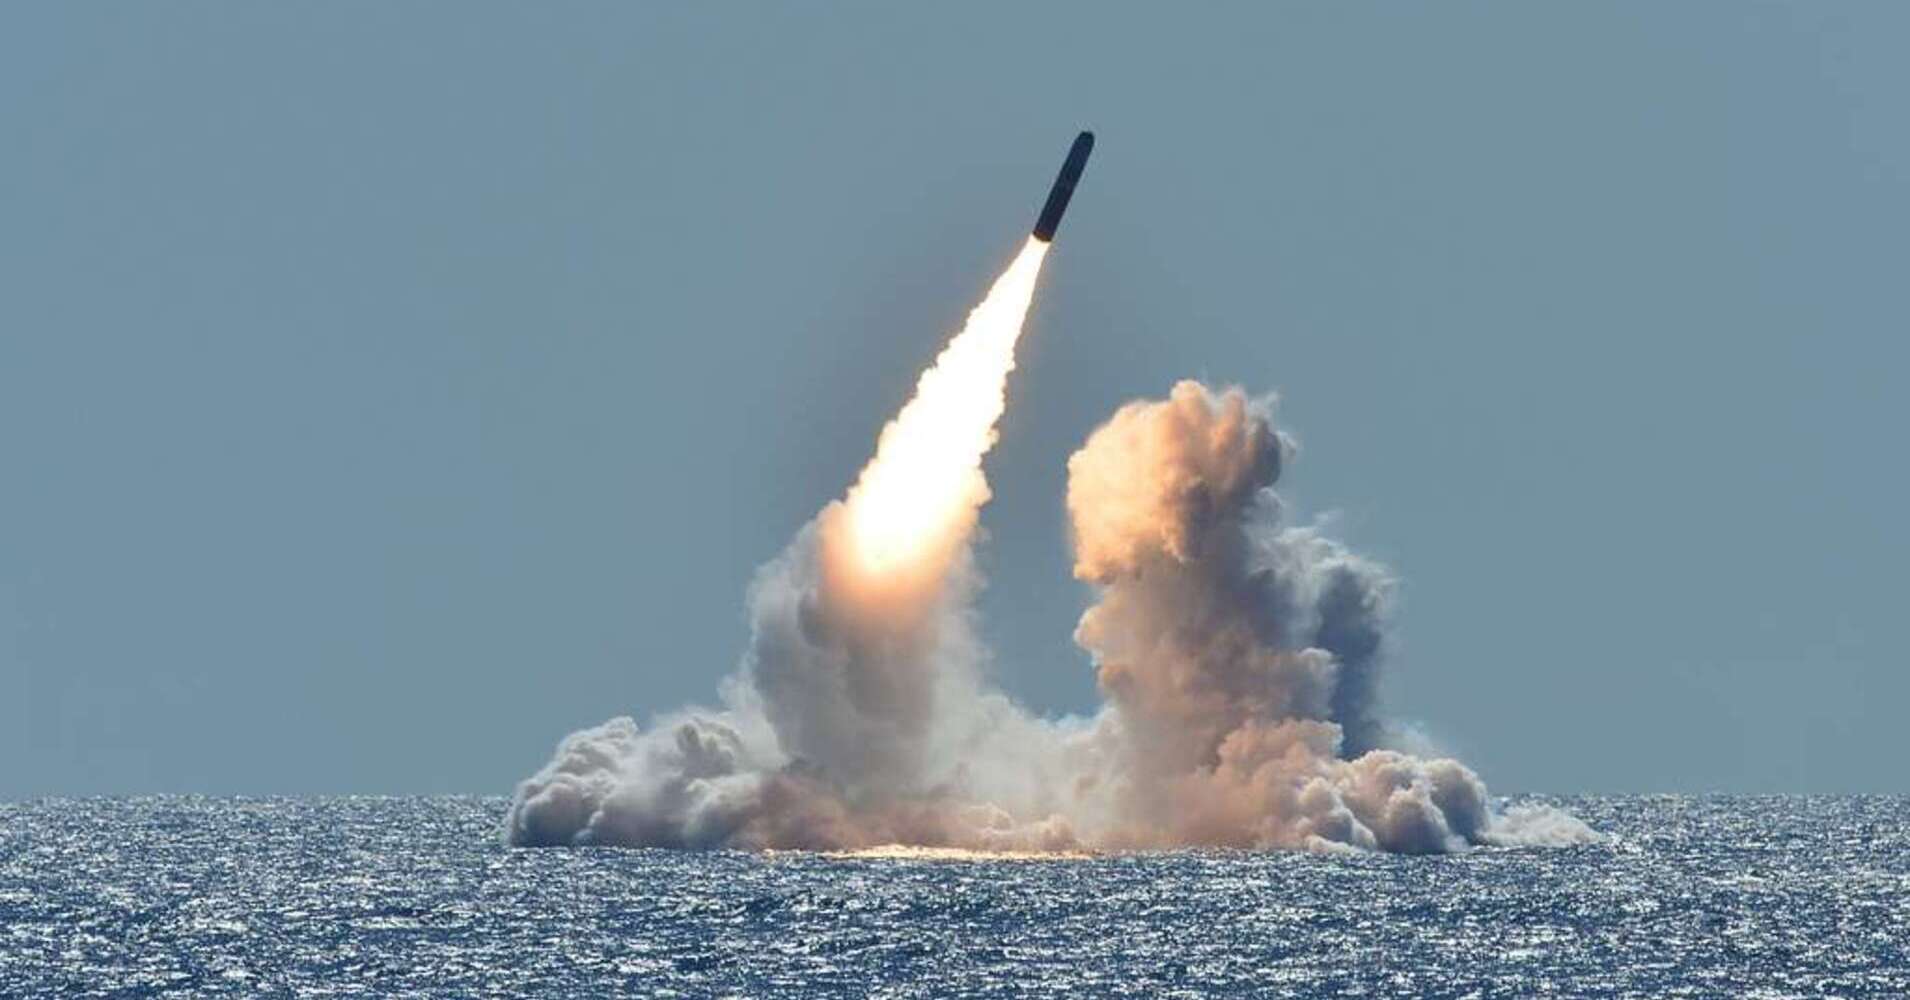 Missile launching over the sea AWE IEMA